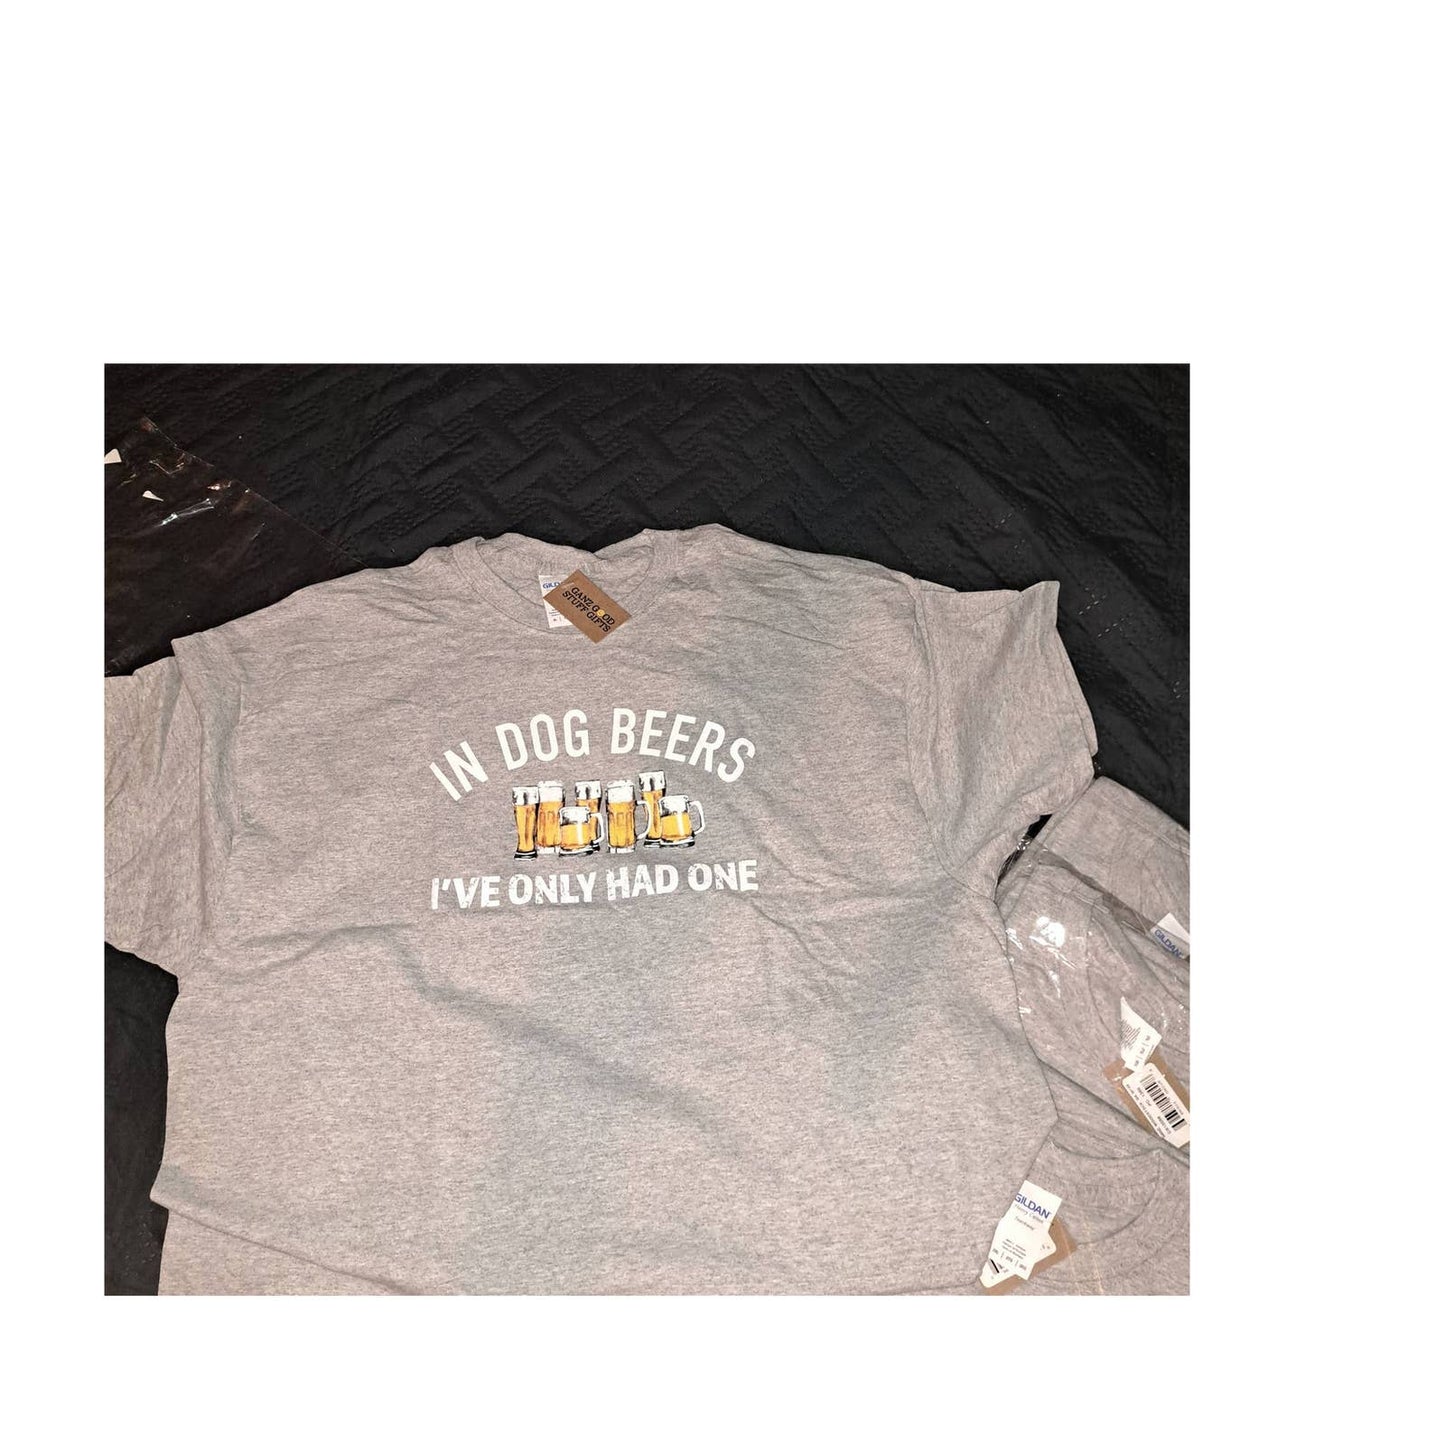 NWT- FUN GIFT! - In Dog Beers I've Only Had One T-Shirts XL-2XL